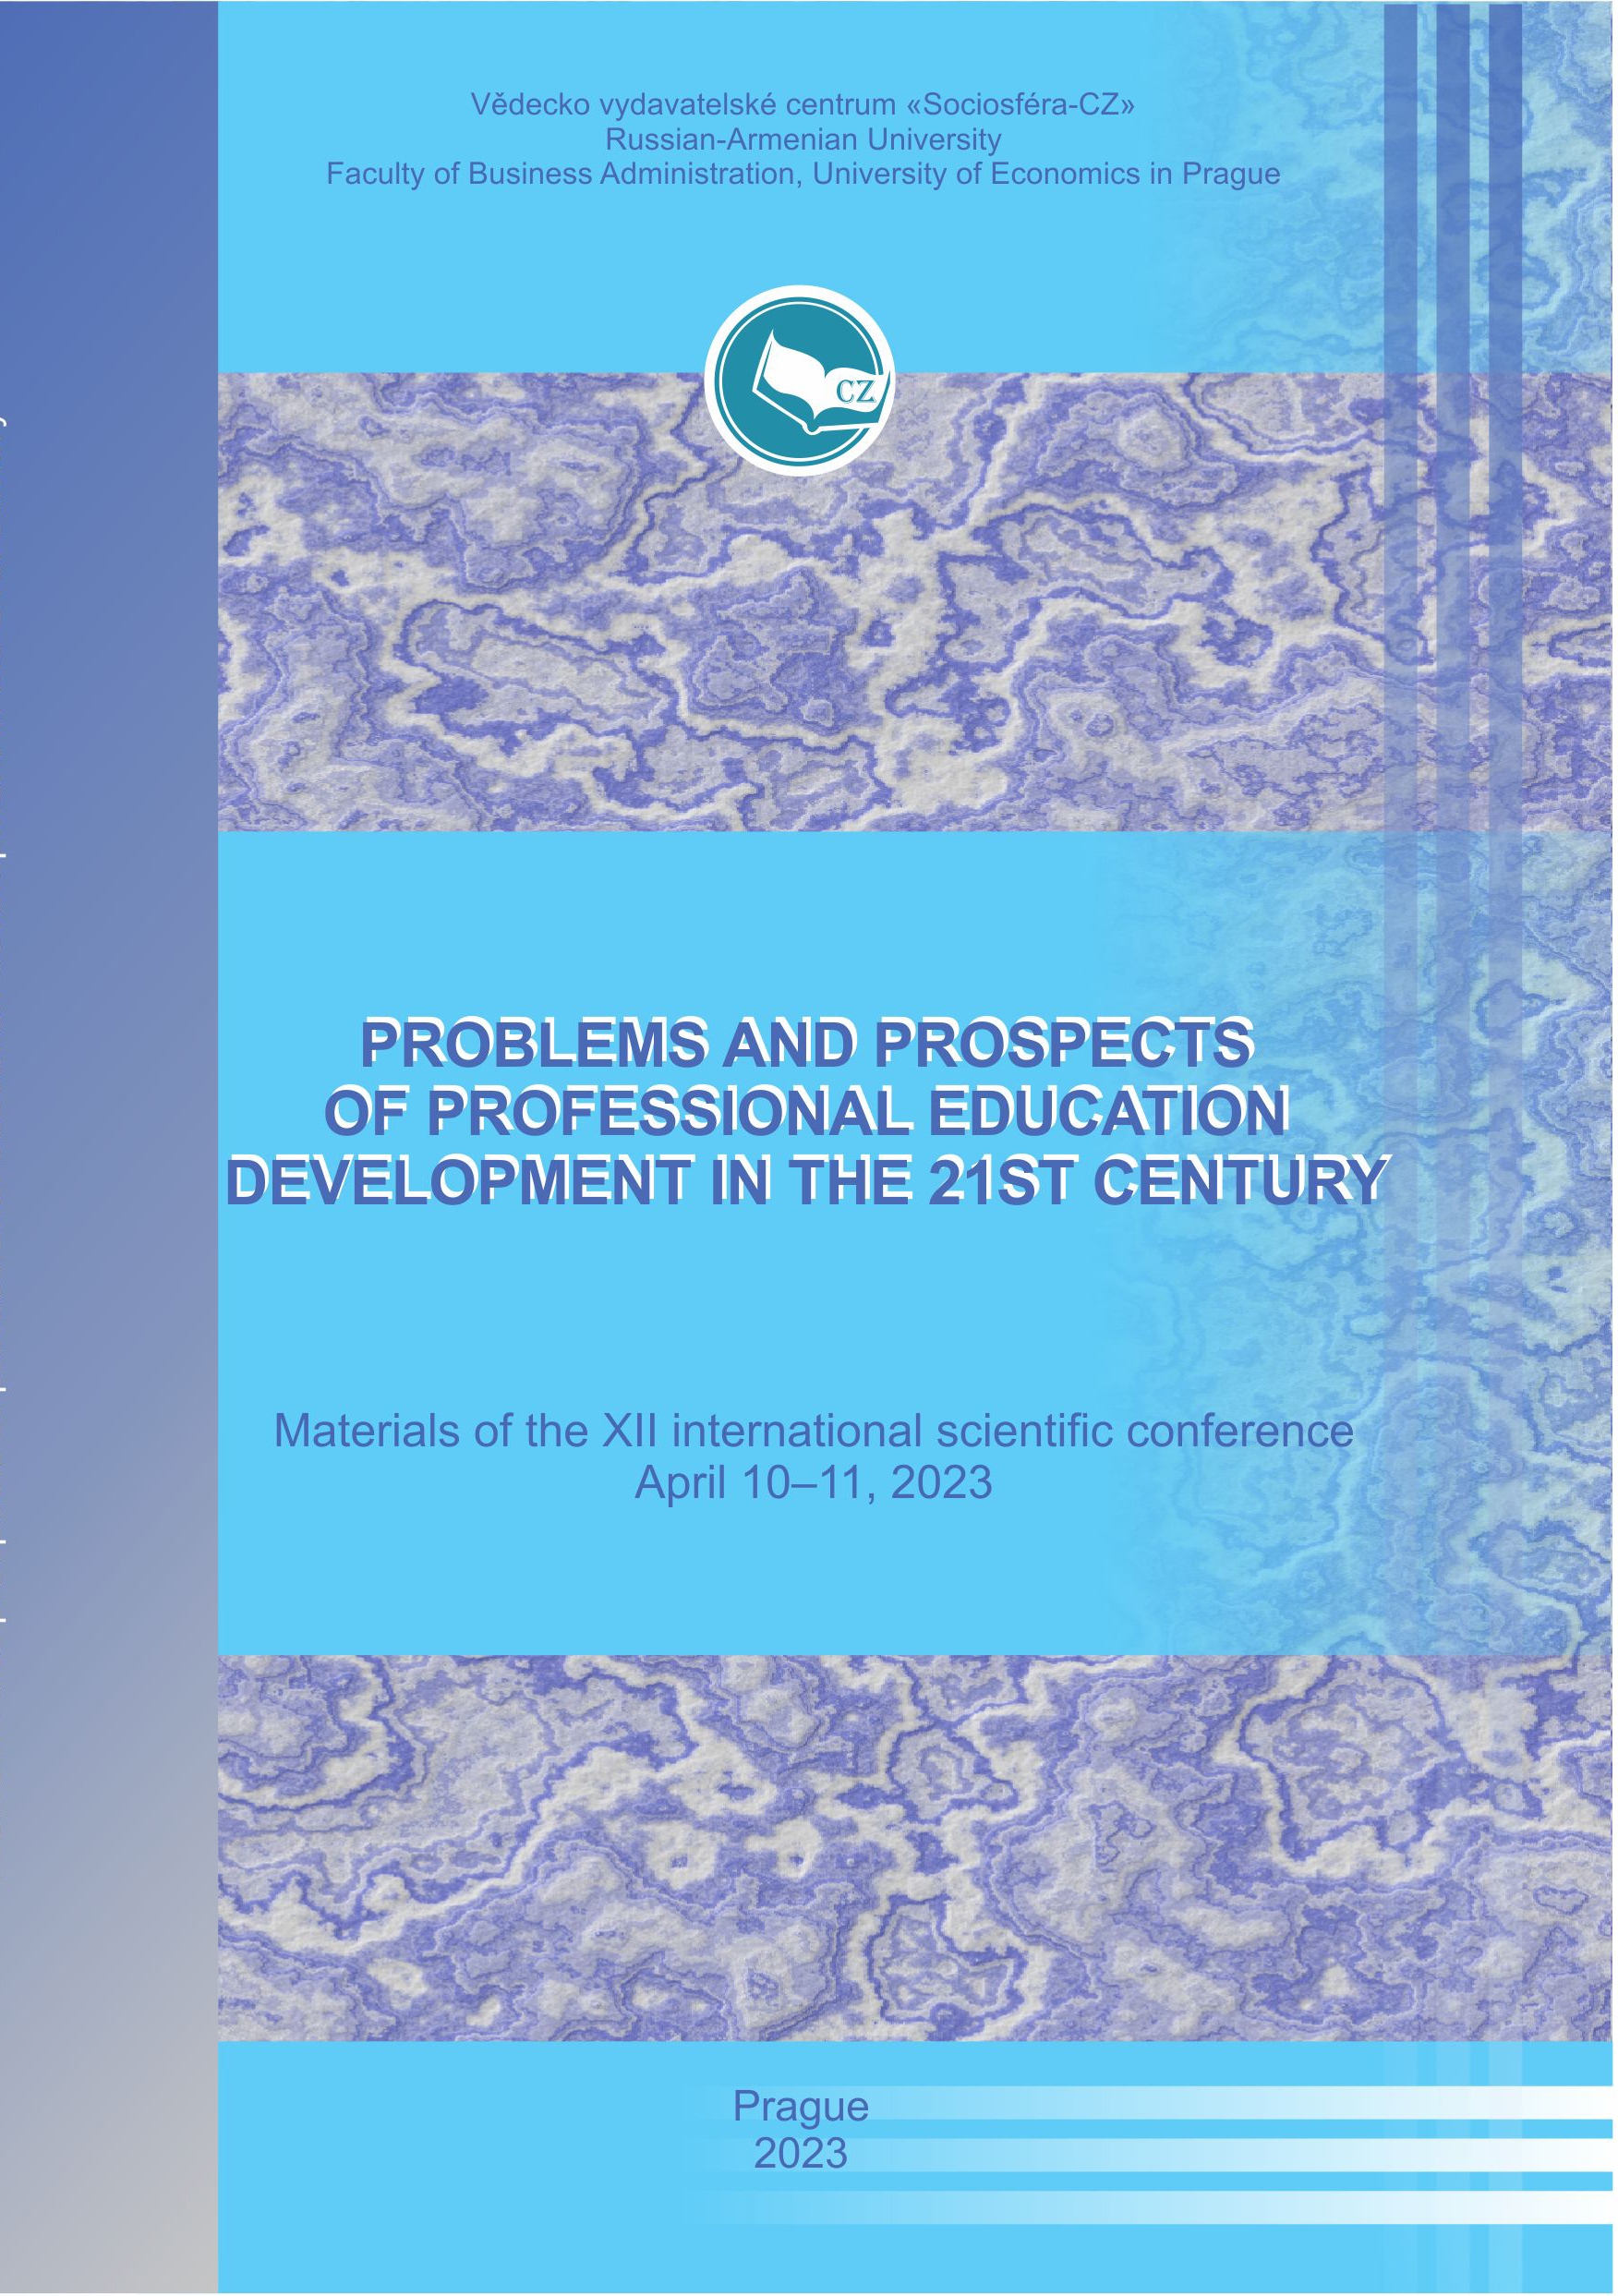 Problems and prospects of professional education development in the 21st century